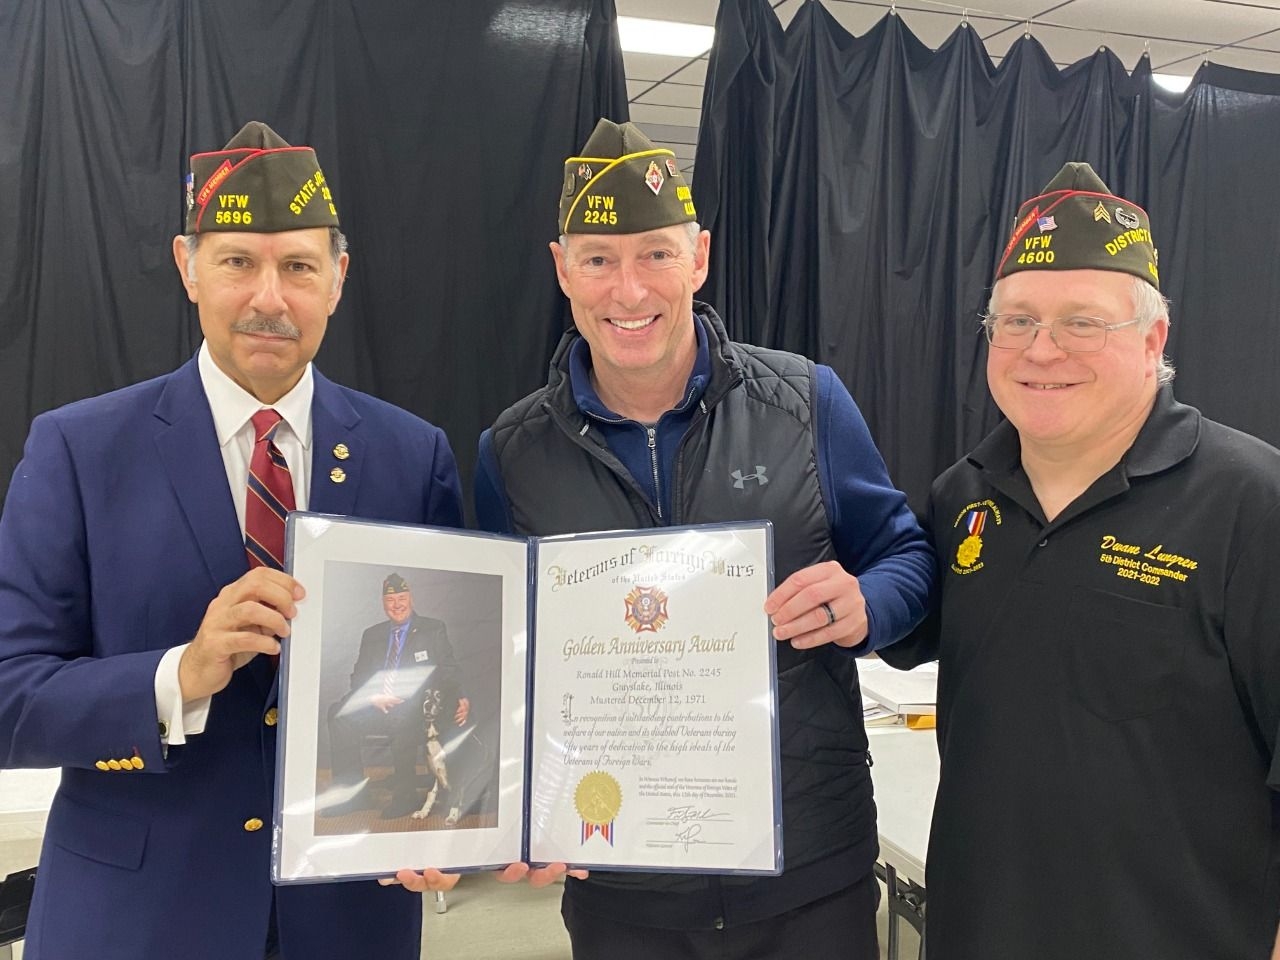 Ron Hill Memorial VFW Post Commander Mike Magnetta received 50th Anniversary Award from Illinois JVC Bret Nilla and 5th Dist Cmdr Dwane Lundgren